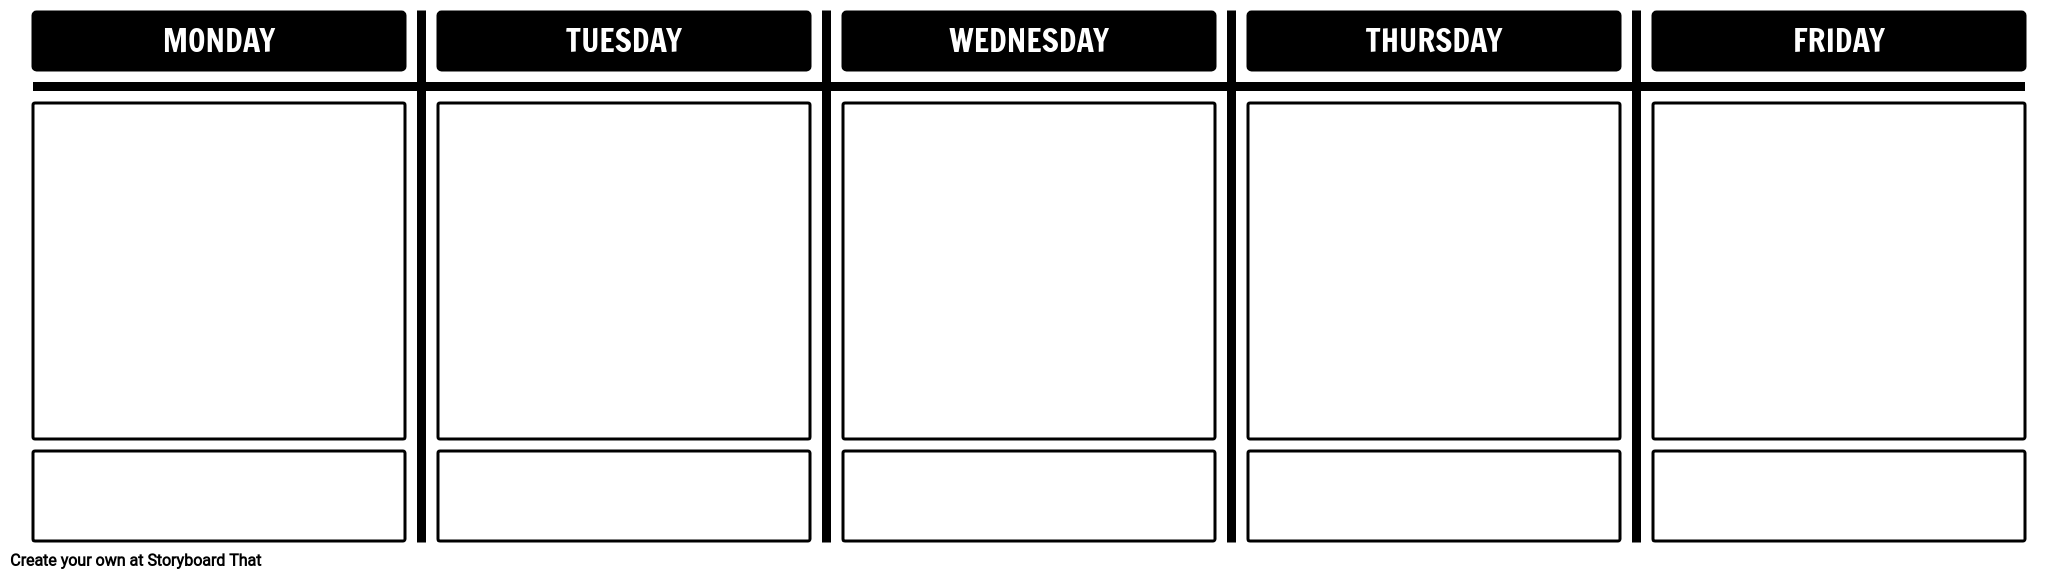 Days of the Week Storyboard by storyboardtemplates